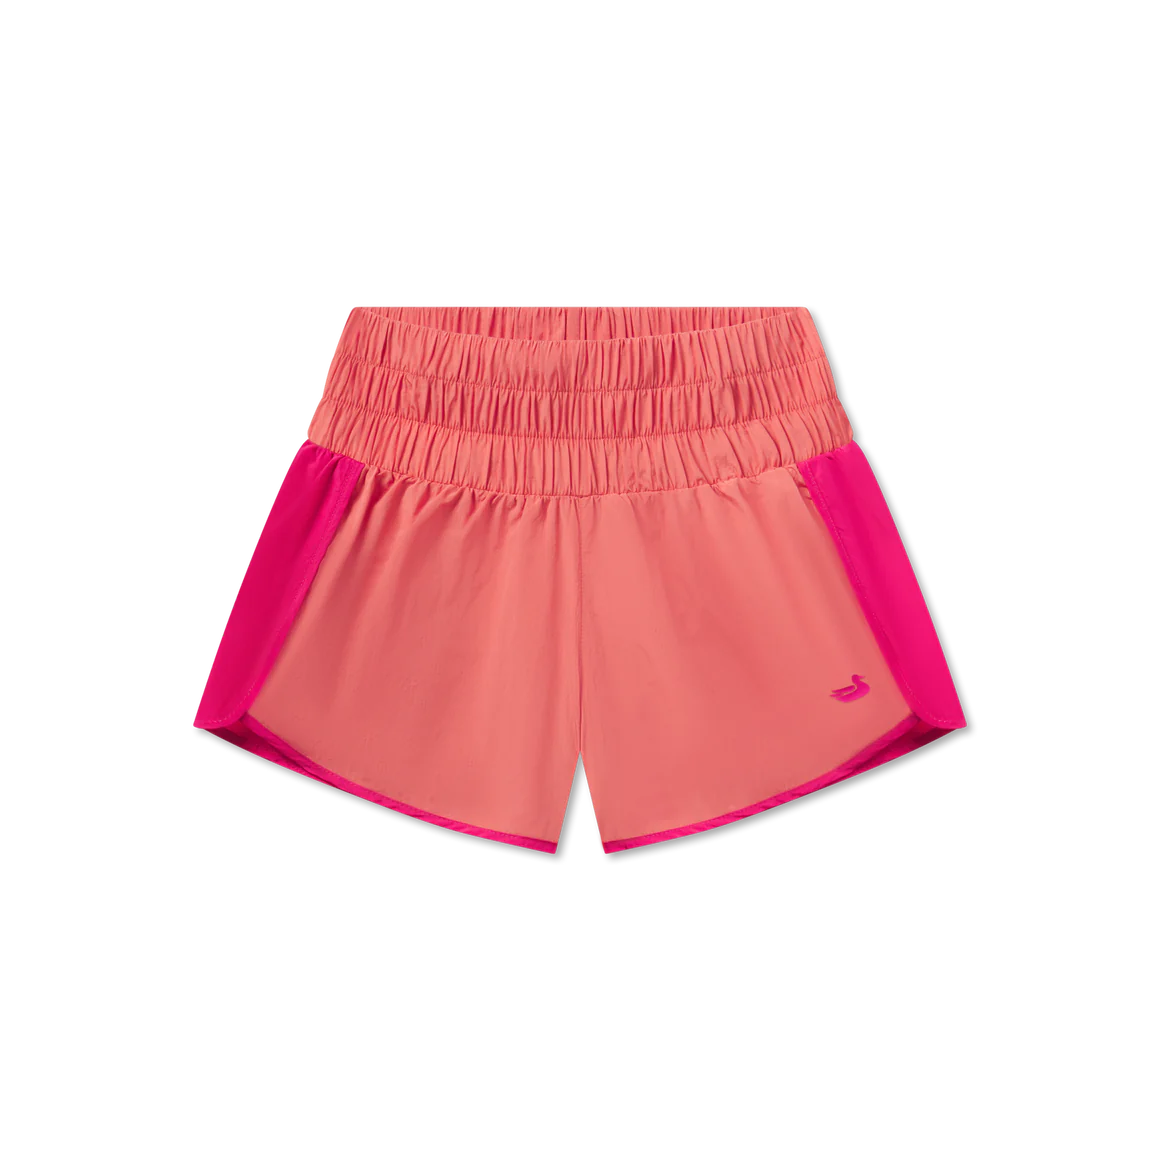 Lele Performance Shorts in Pink & Coral